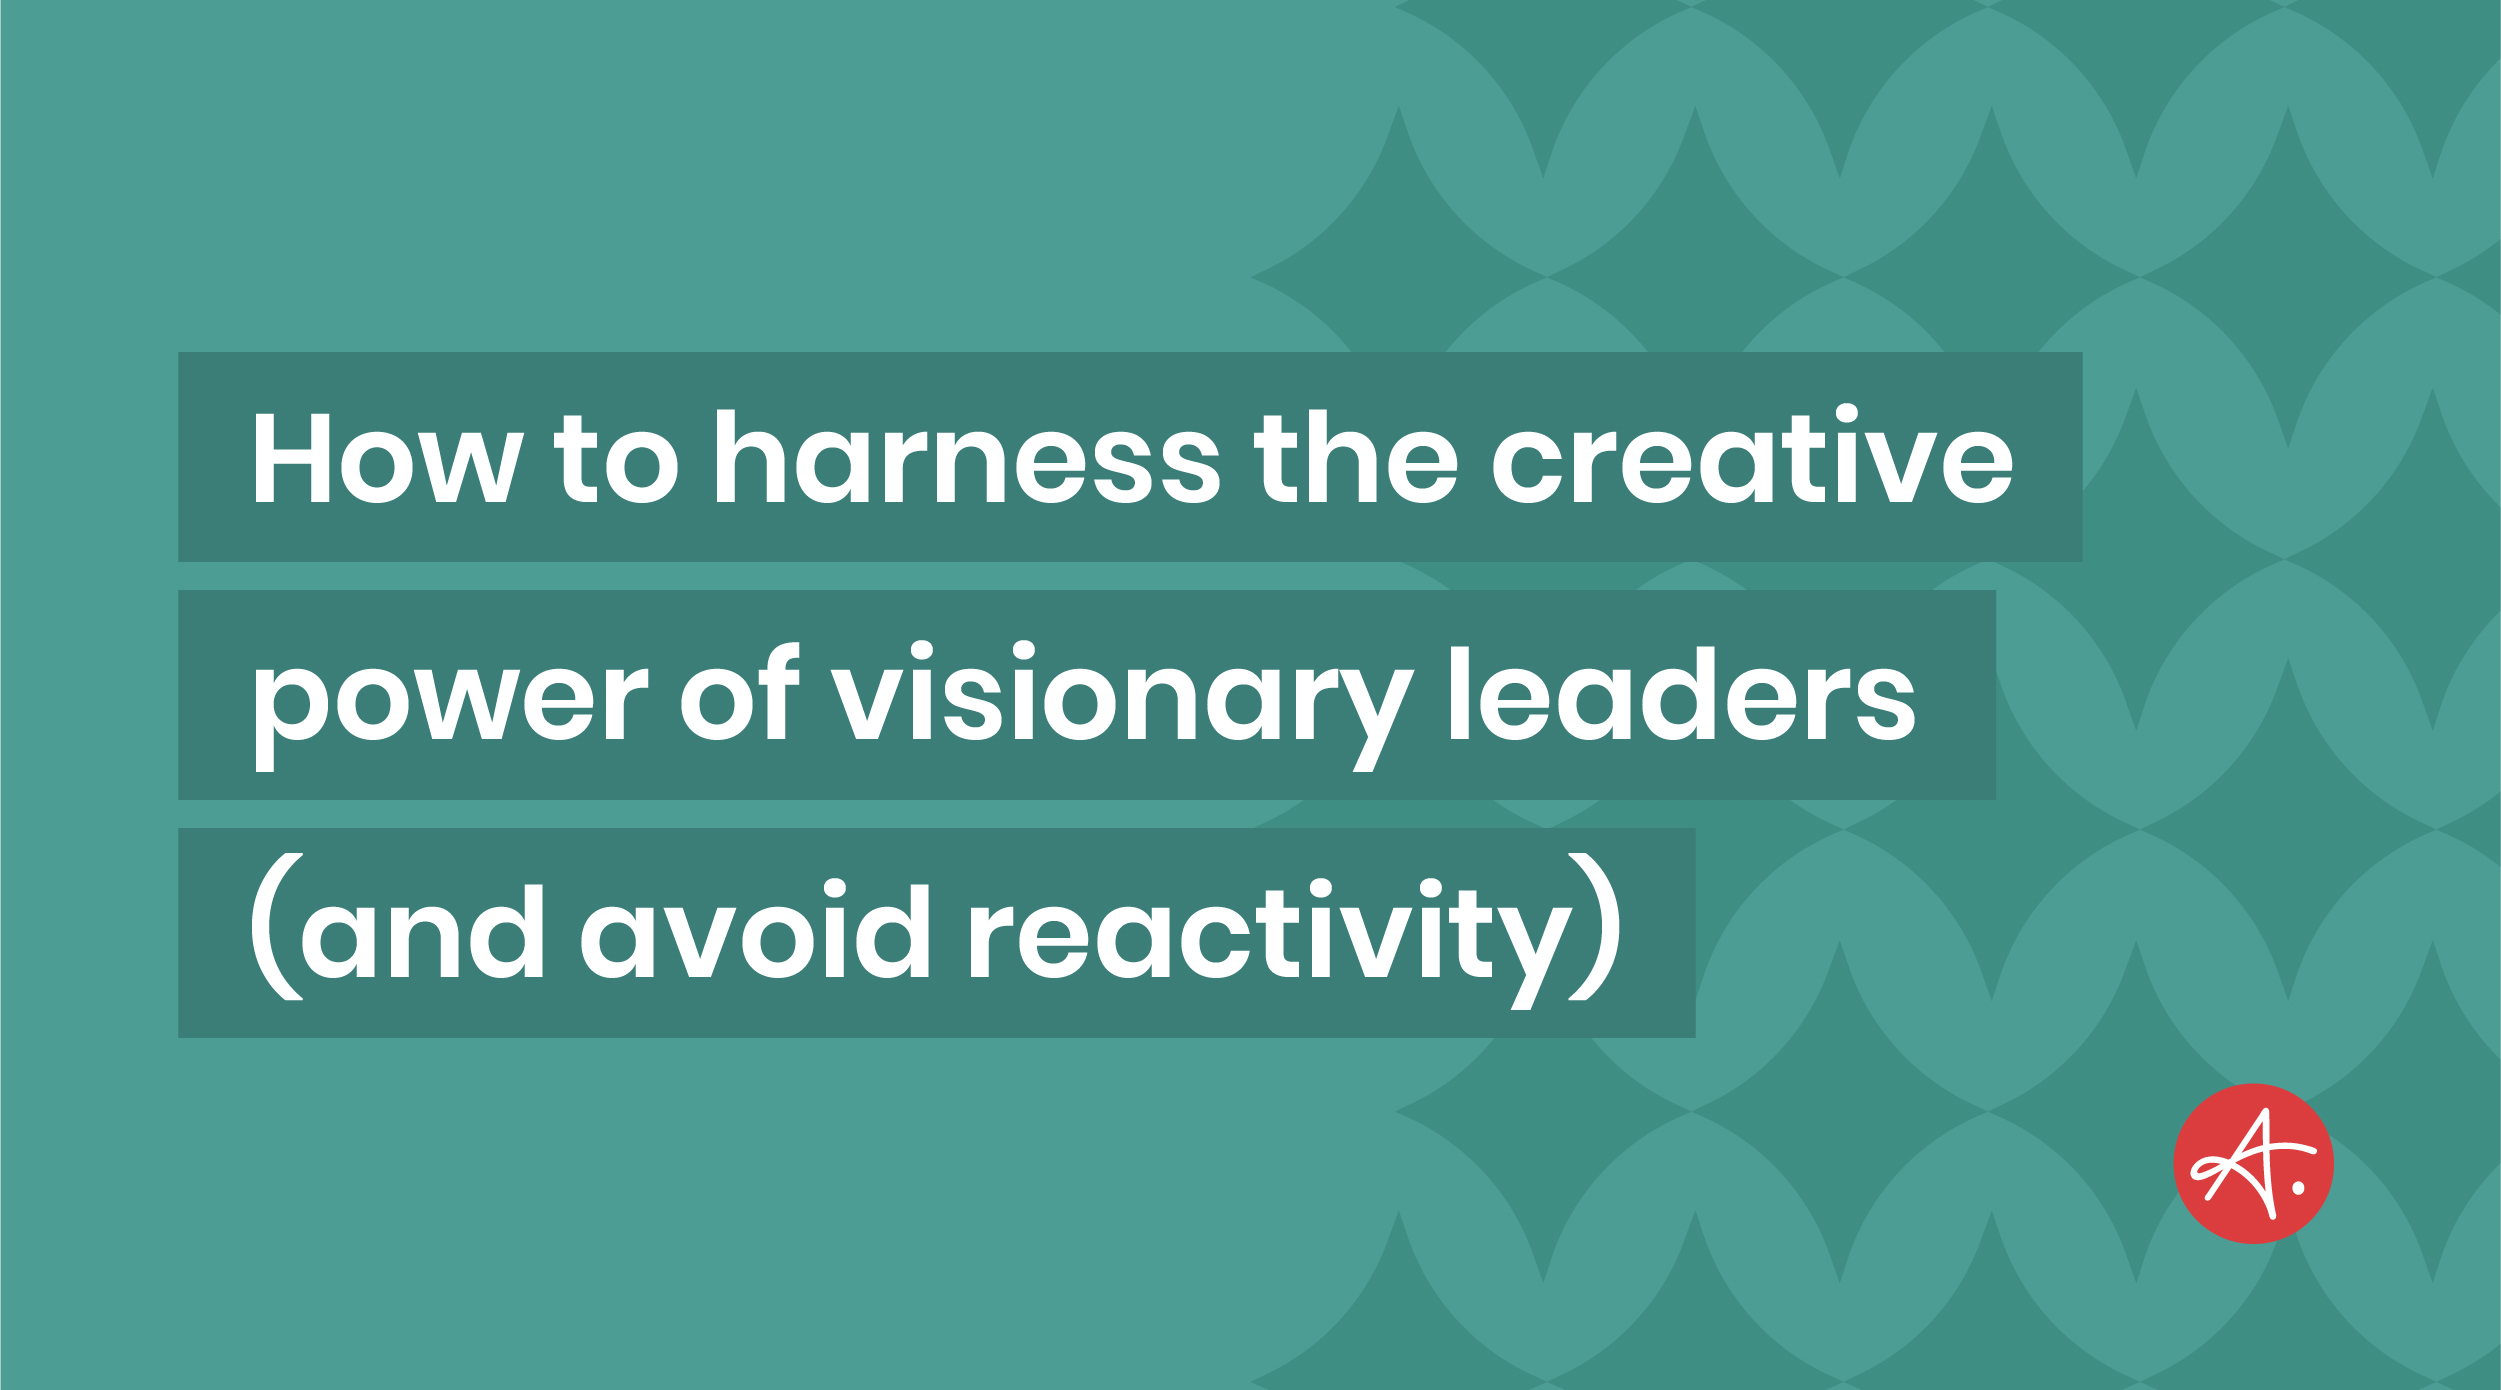 How marketers can harness the creative power of visionary leaders (and avoid reactivity)